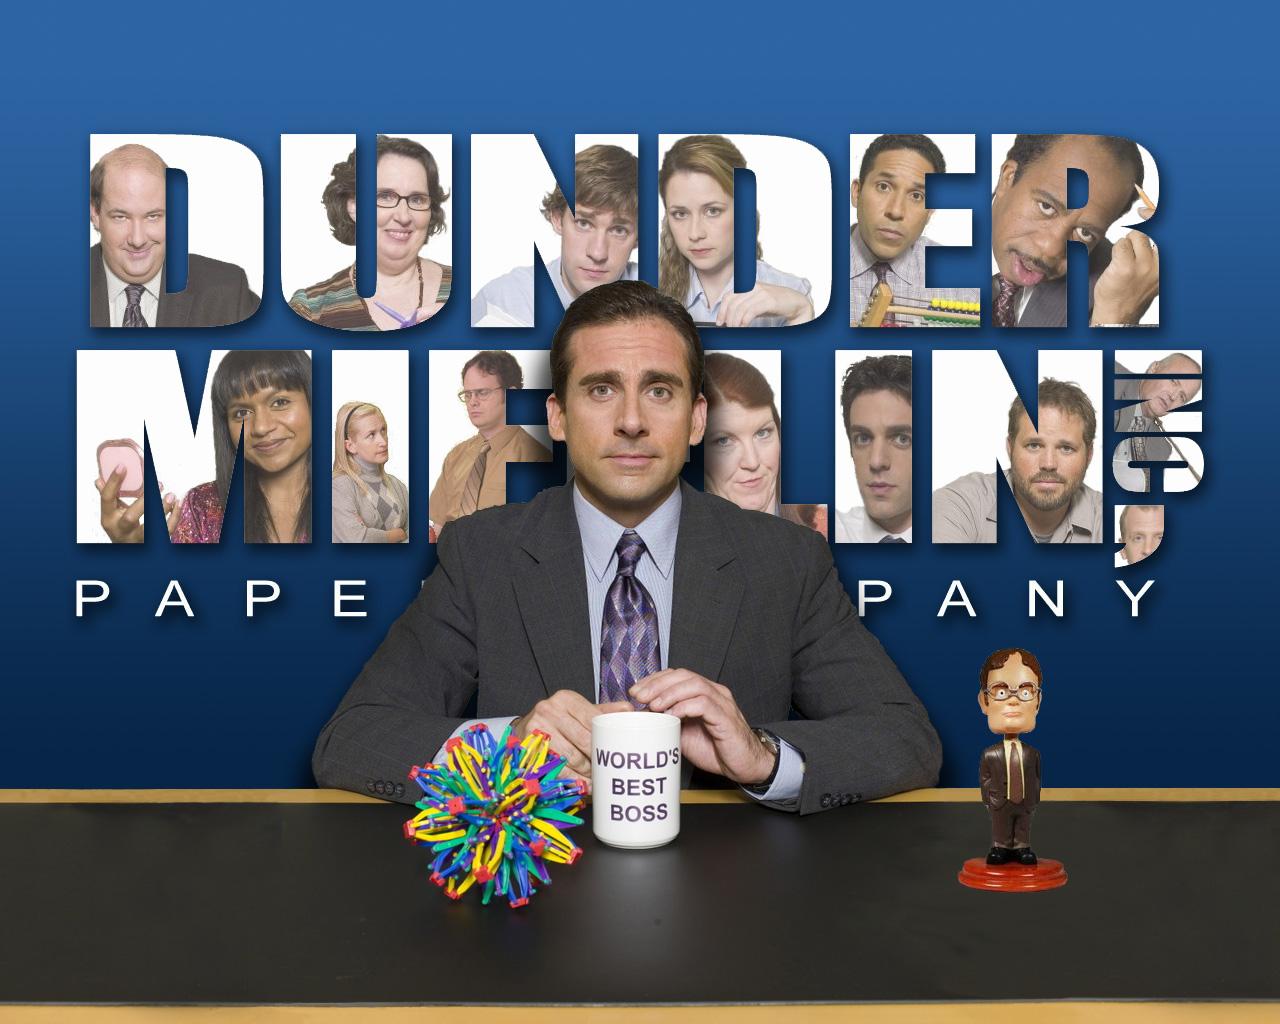 Aesthetic The Office Wallpapers